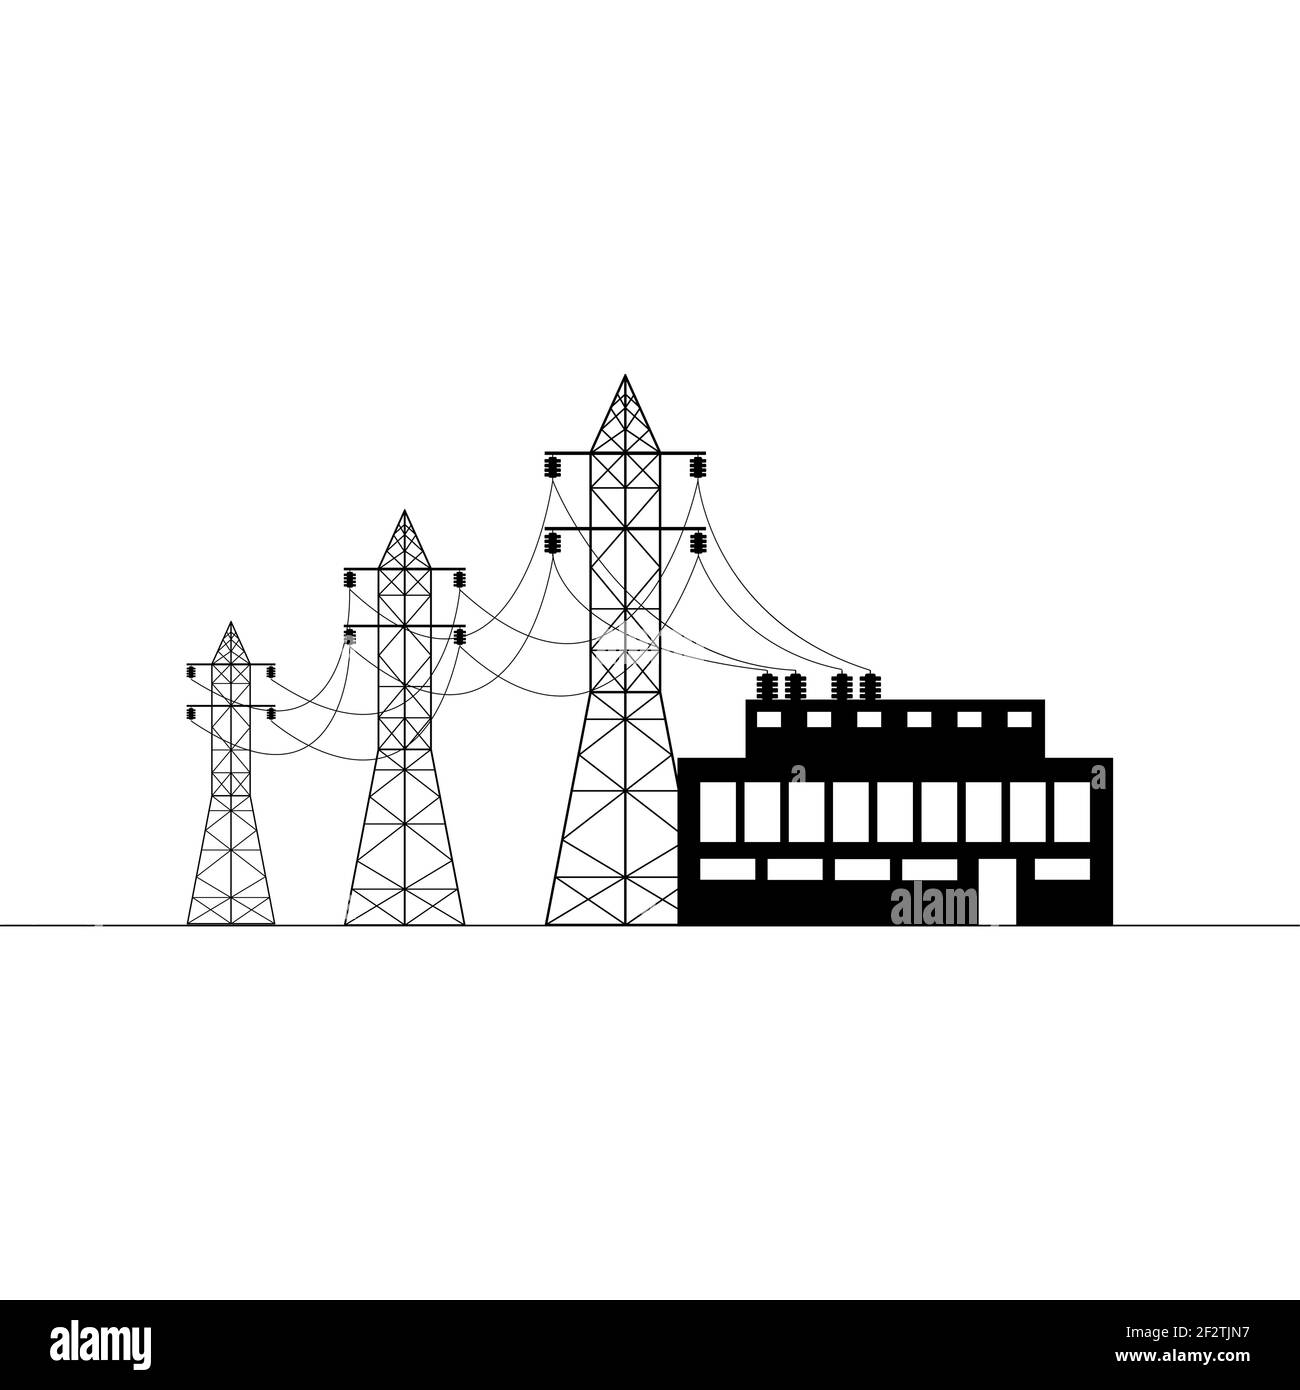 Overhead power line, transformer substation. Electricity transmission and supply. Flat vector illustration. Stock Vector